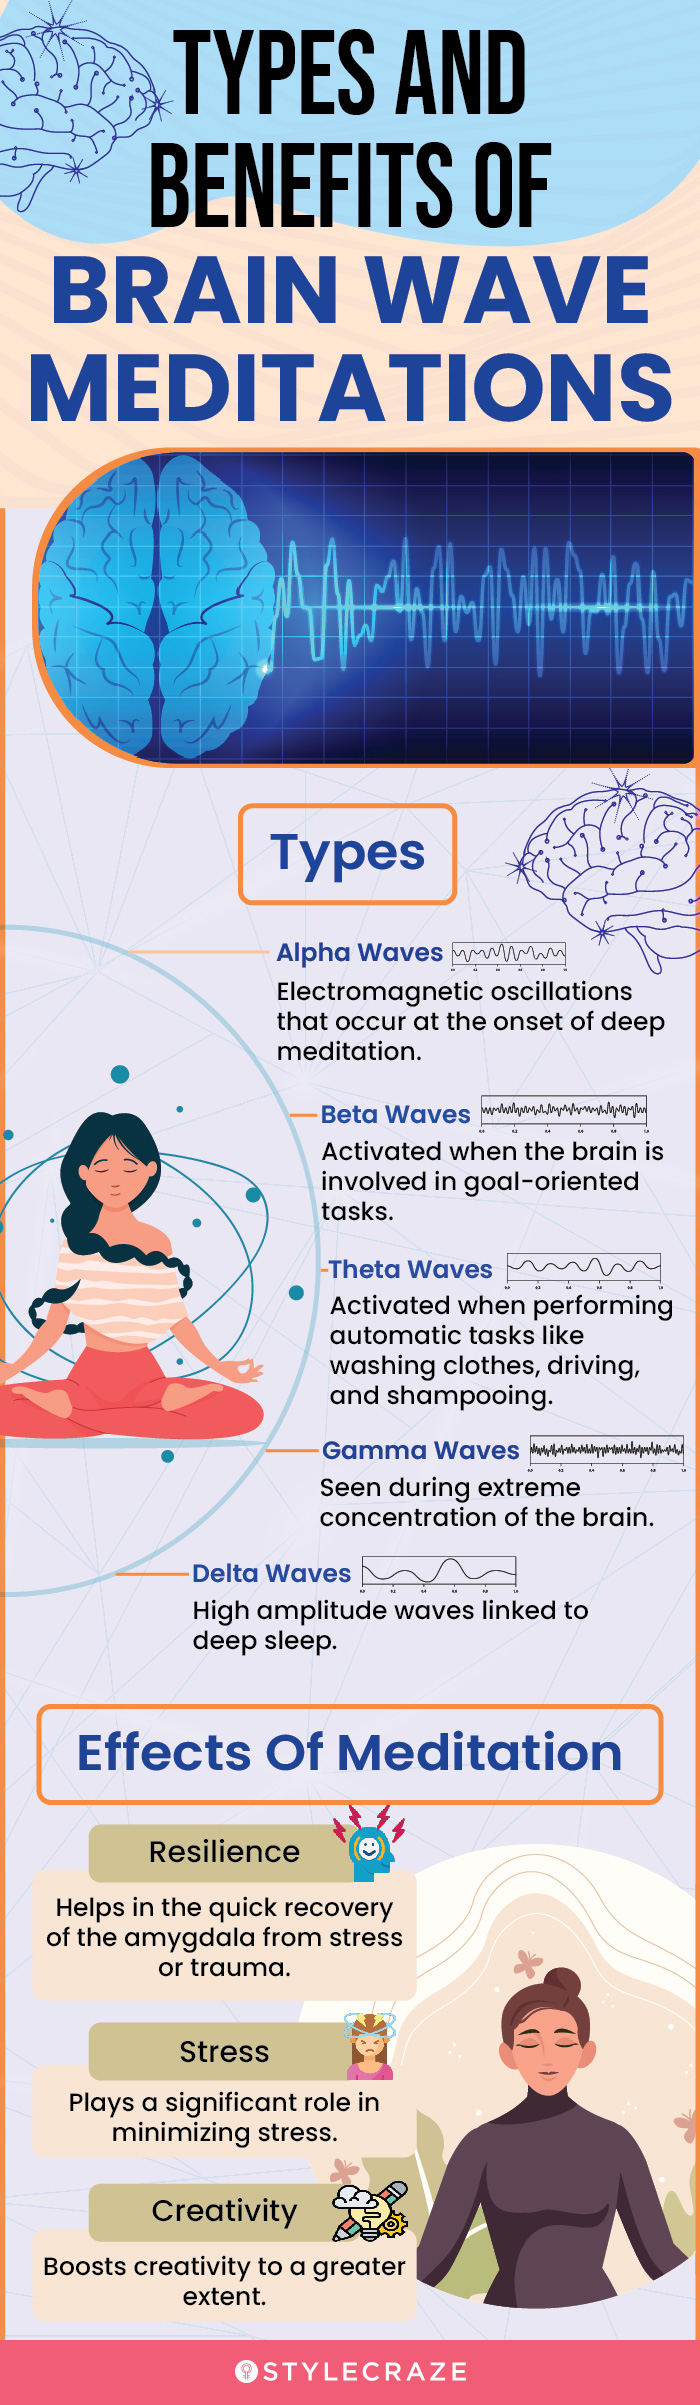 types and benefits of brain wave meditations [infographic] width=